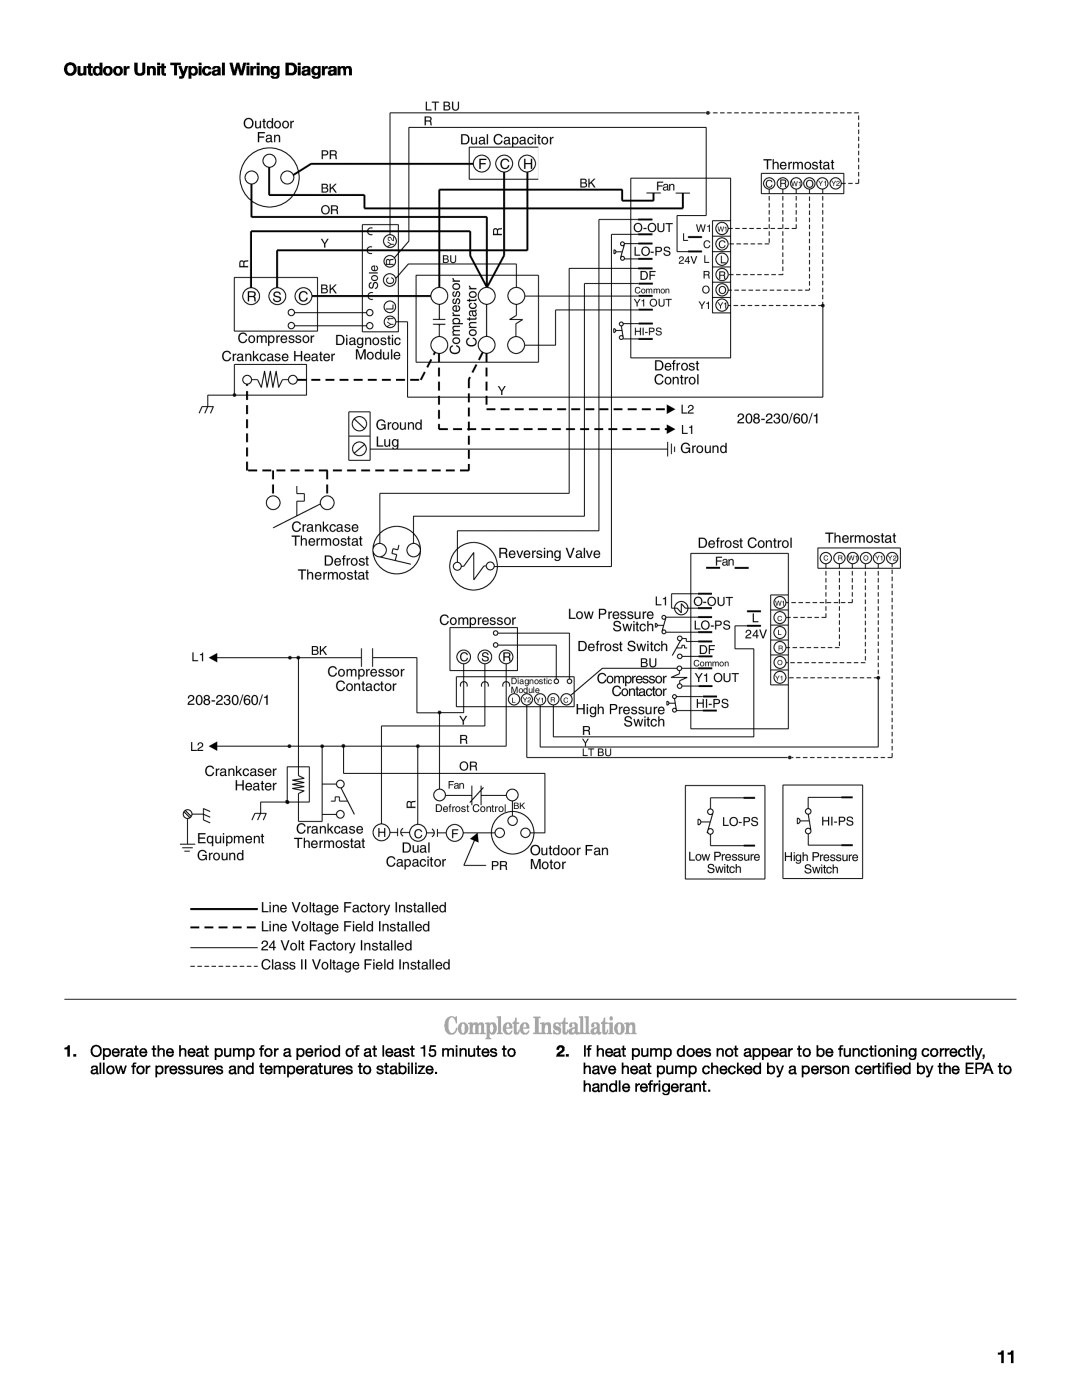 Whirlpool W4GH6 installation instructions Complete Installation, Outdoor Unit Typical Wiring Diagram 